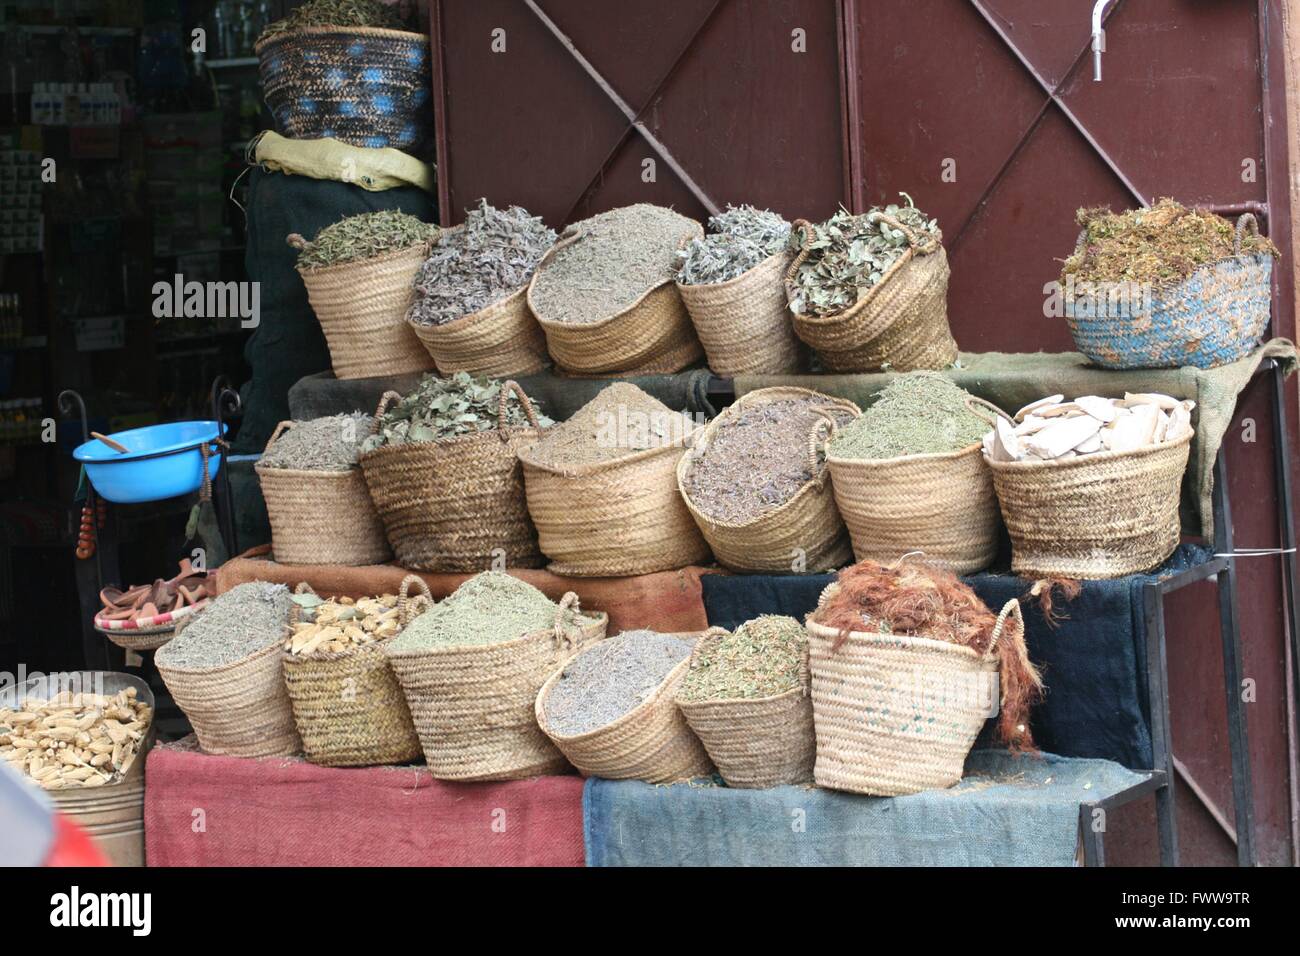 Marrakech market, baskets of herbs and spices Stock Photo